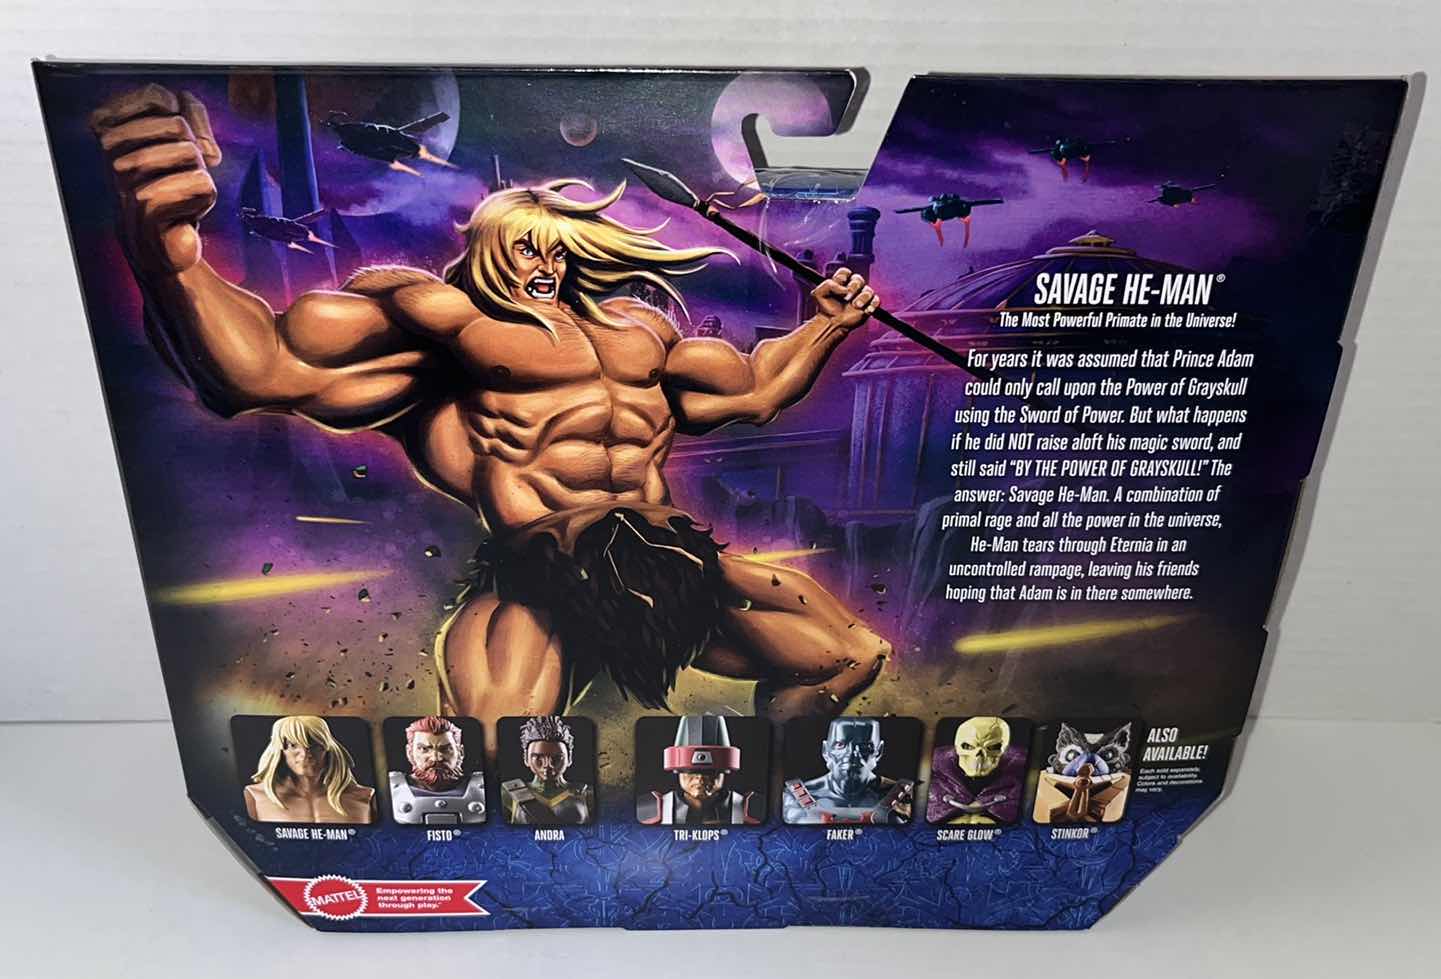 Photo 3 of NEW MATTEL MASTERS OF THE UNIVERSE REVELATION ACTION FIGURE & ACCESSORIES, SAVAGE HE-MAN & ORKO (1)